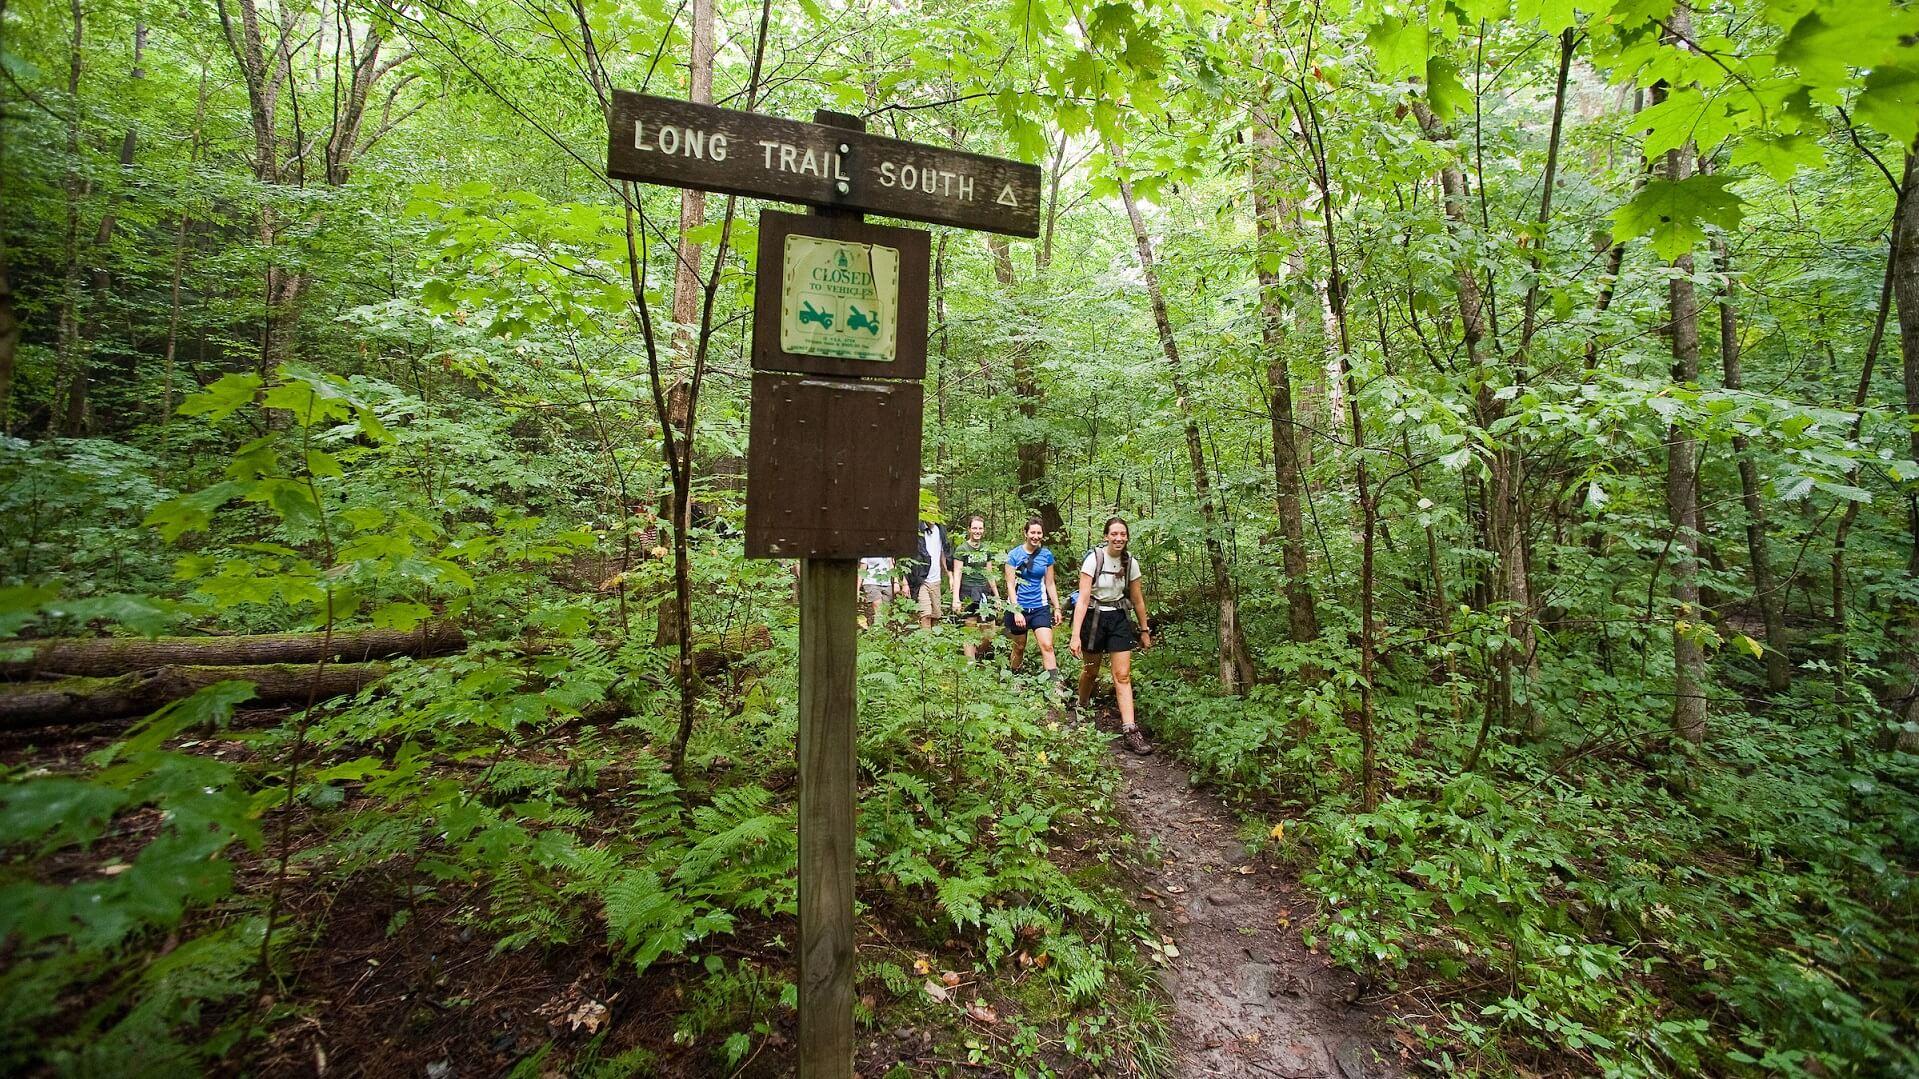 Students hiking in the Green Mountains, a trail sign on the left says "Long Trail South"